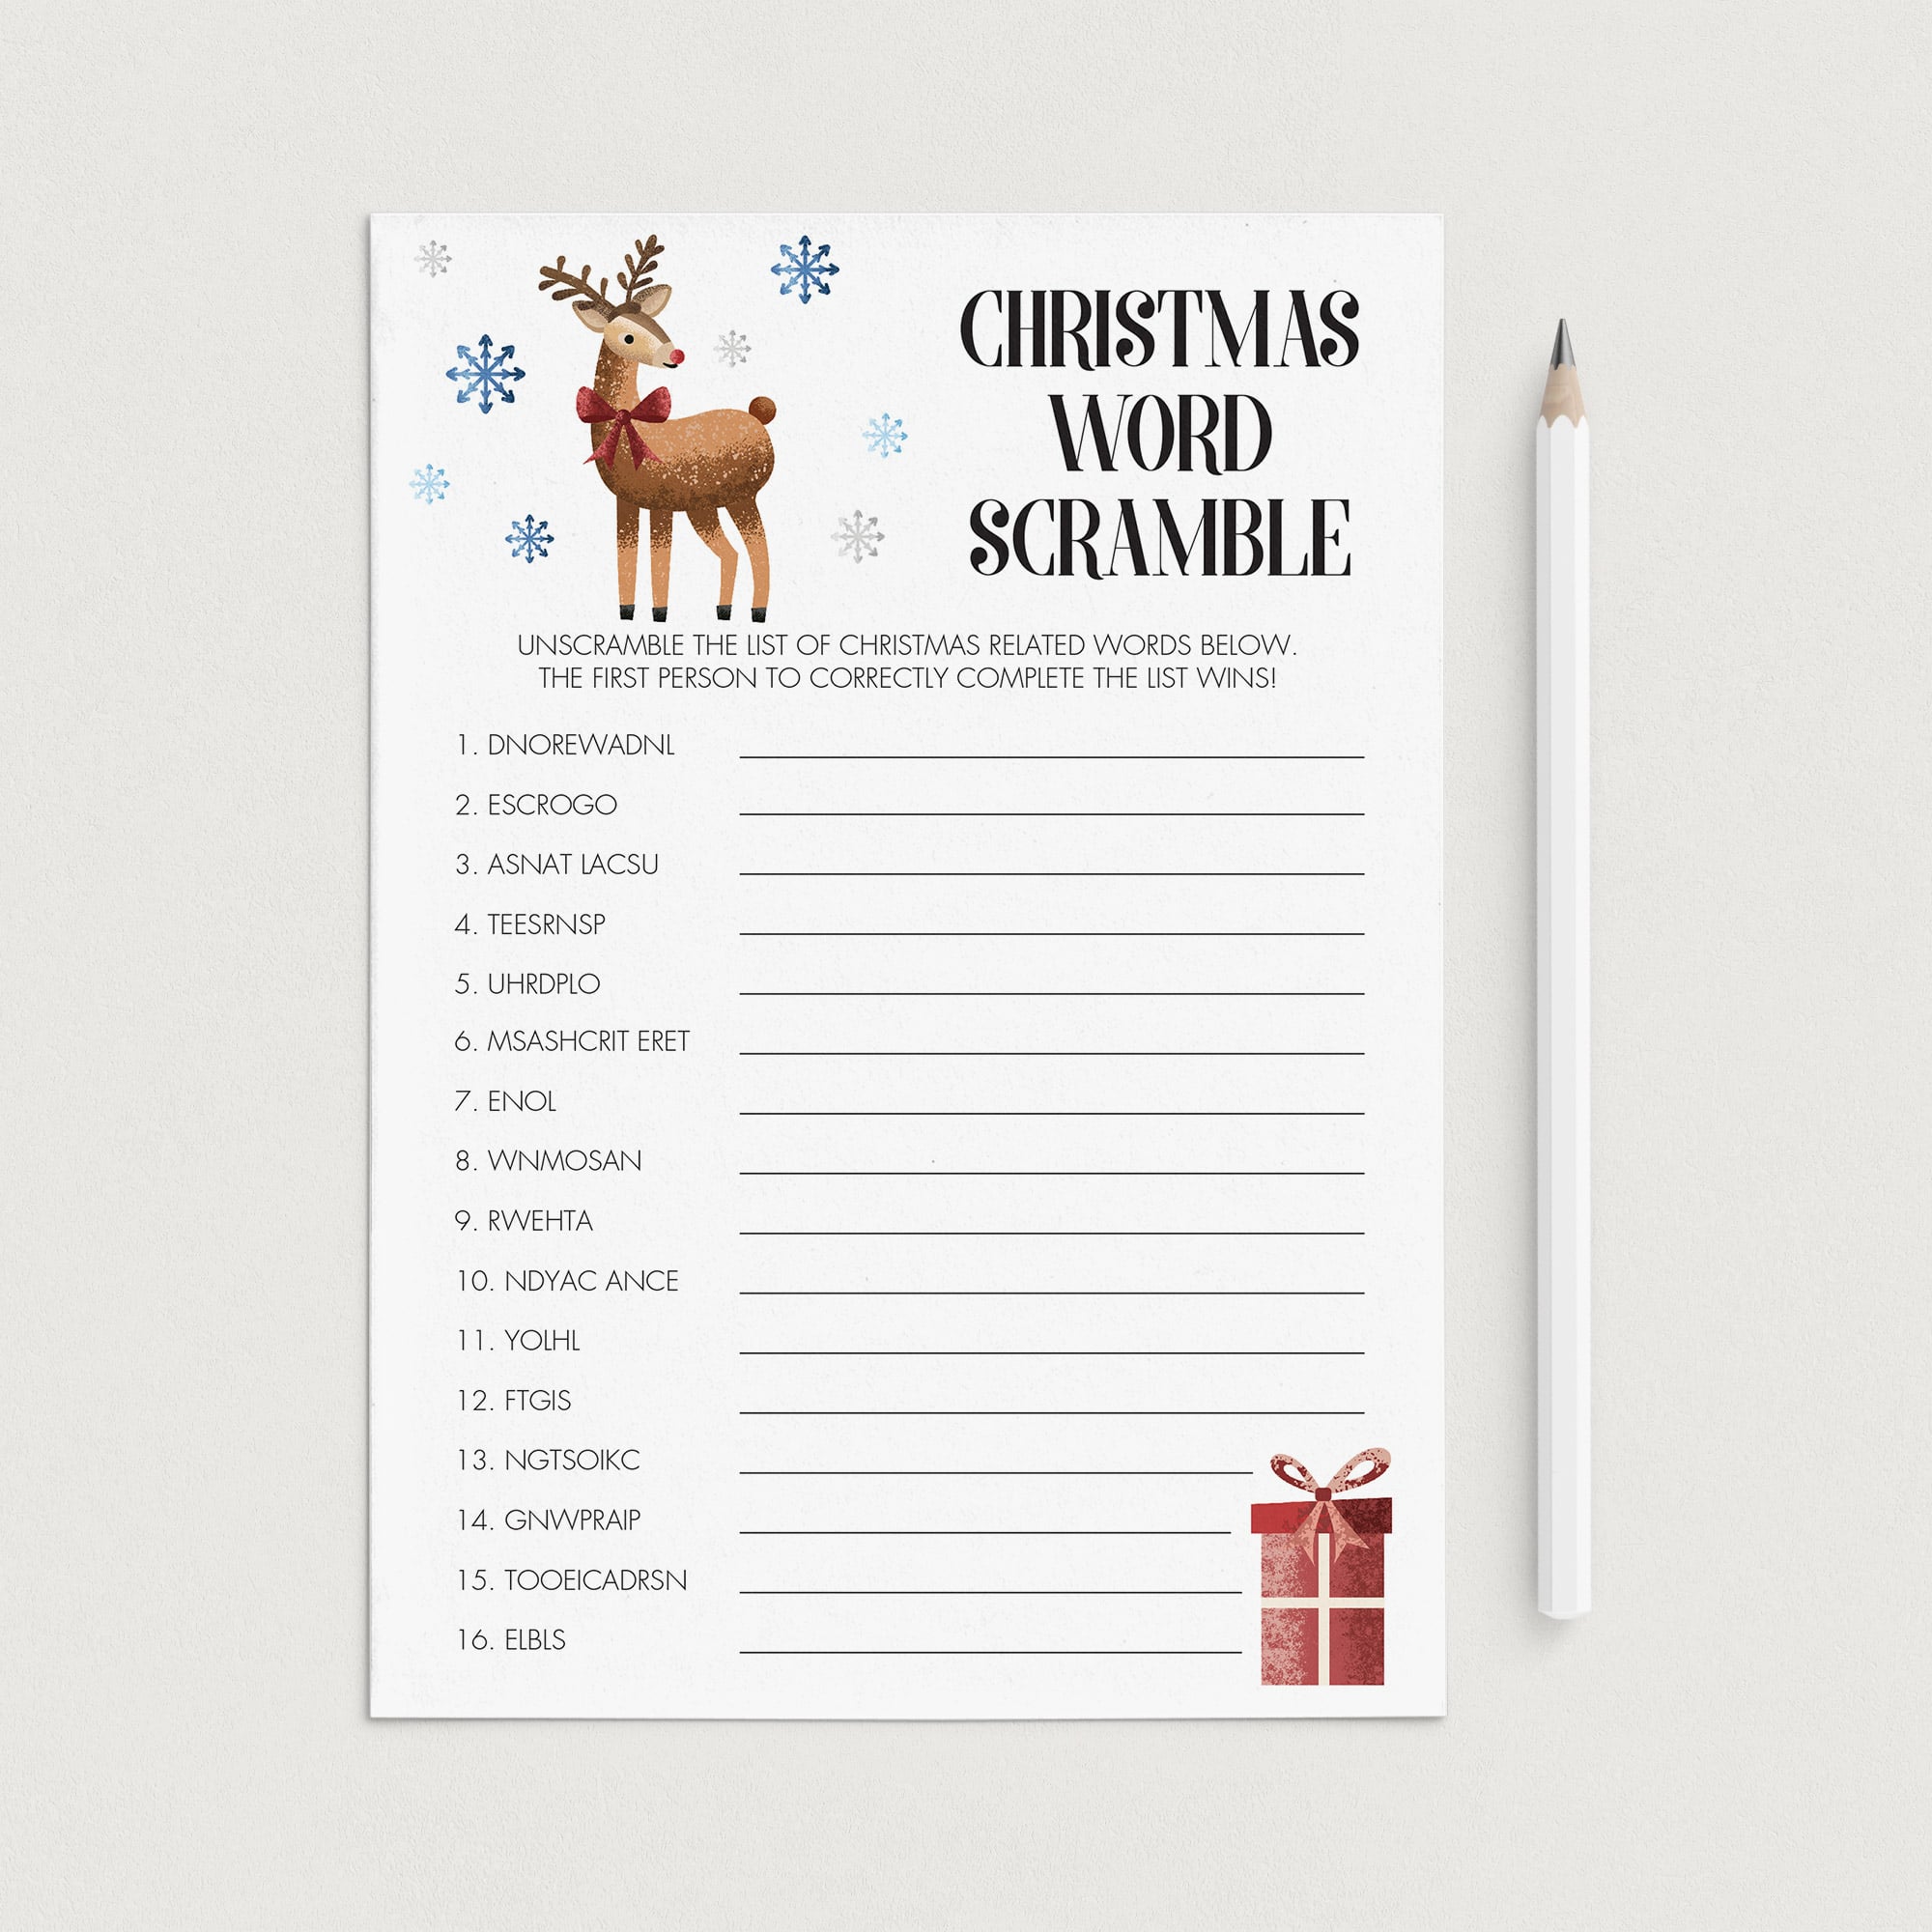 Fun Christmas Word Scramble Puzzle Instant Download by LittleSizzle